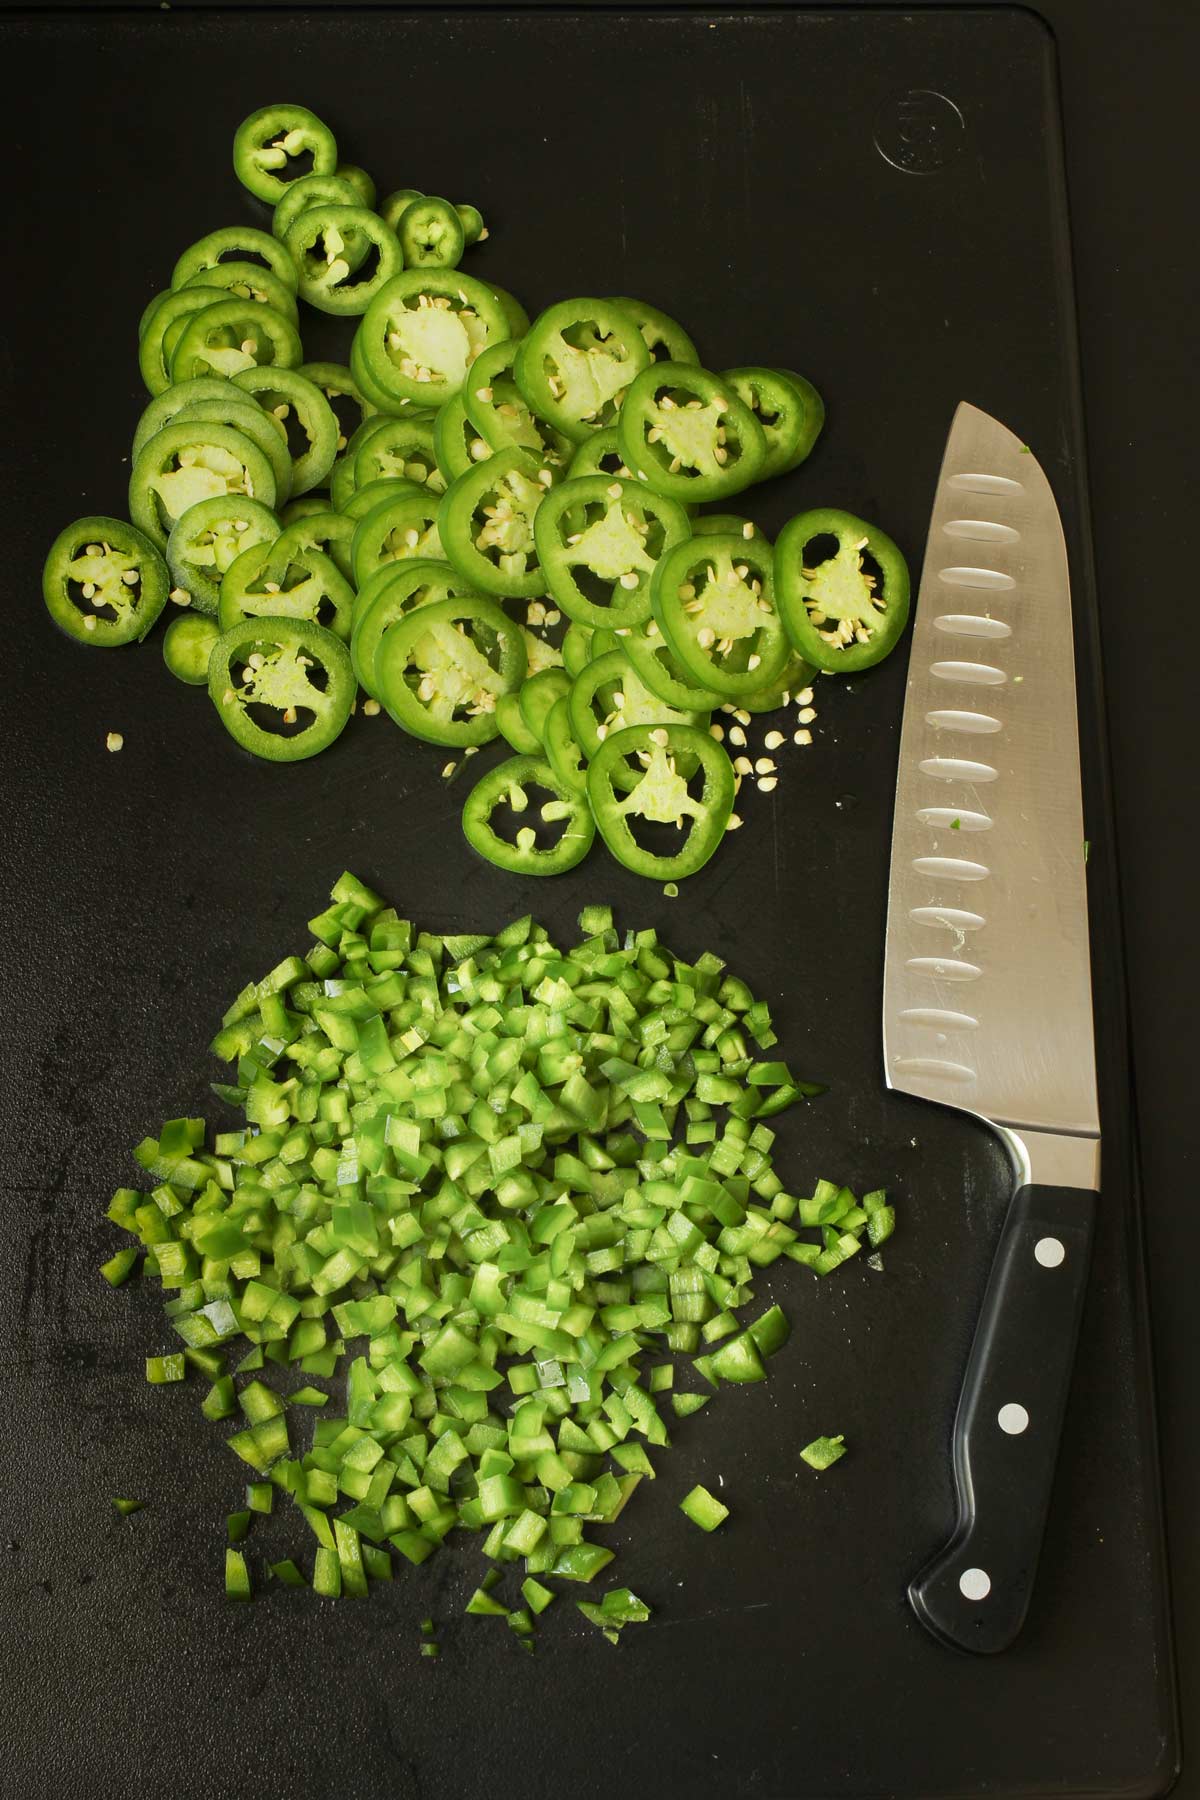 sliced and chopped jalapeños on black cutting board with knife nearby.